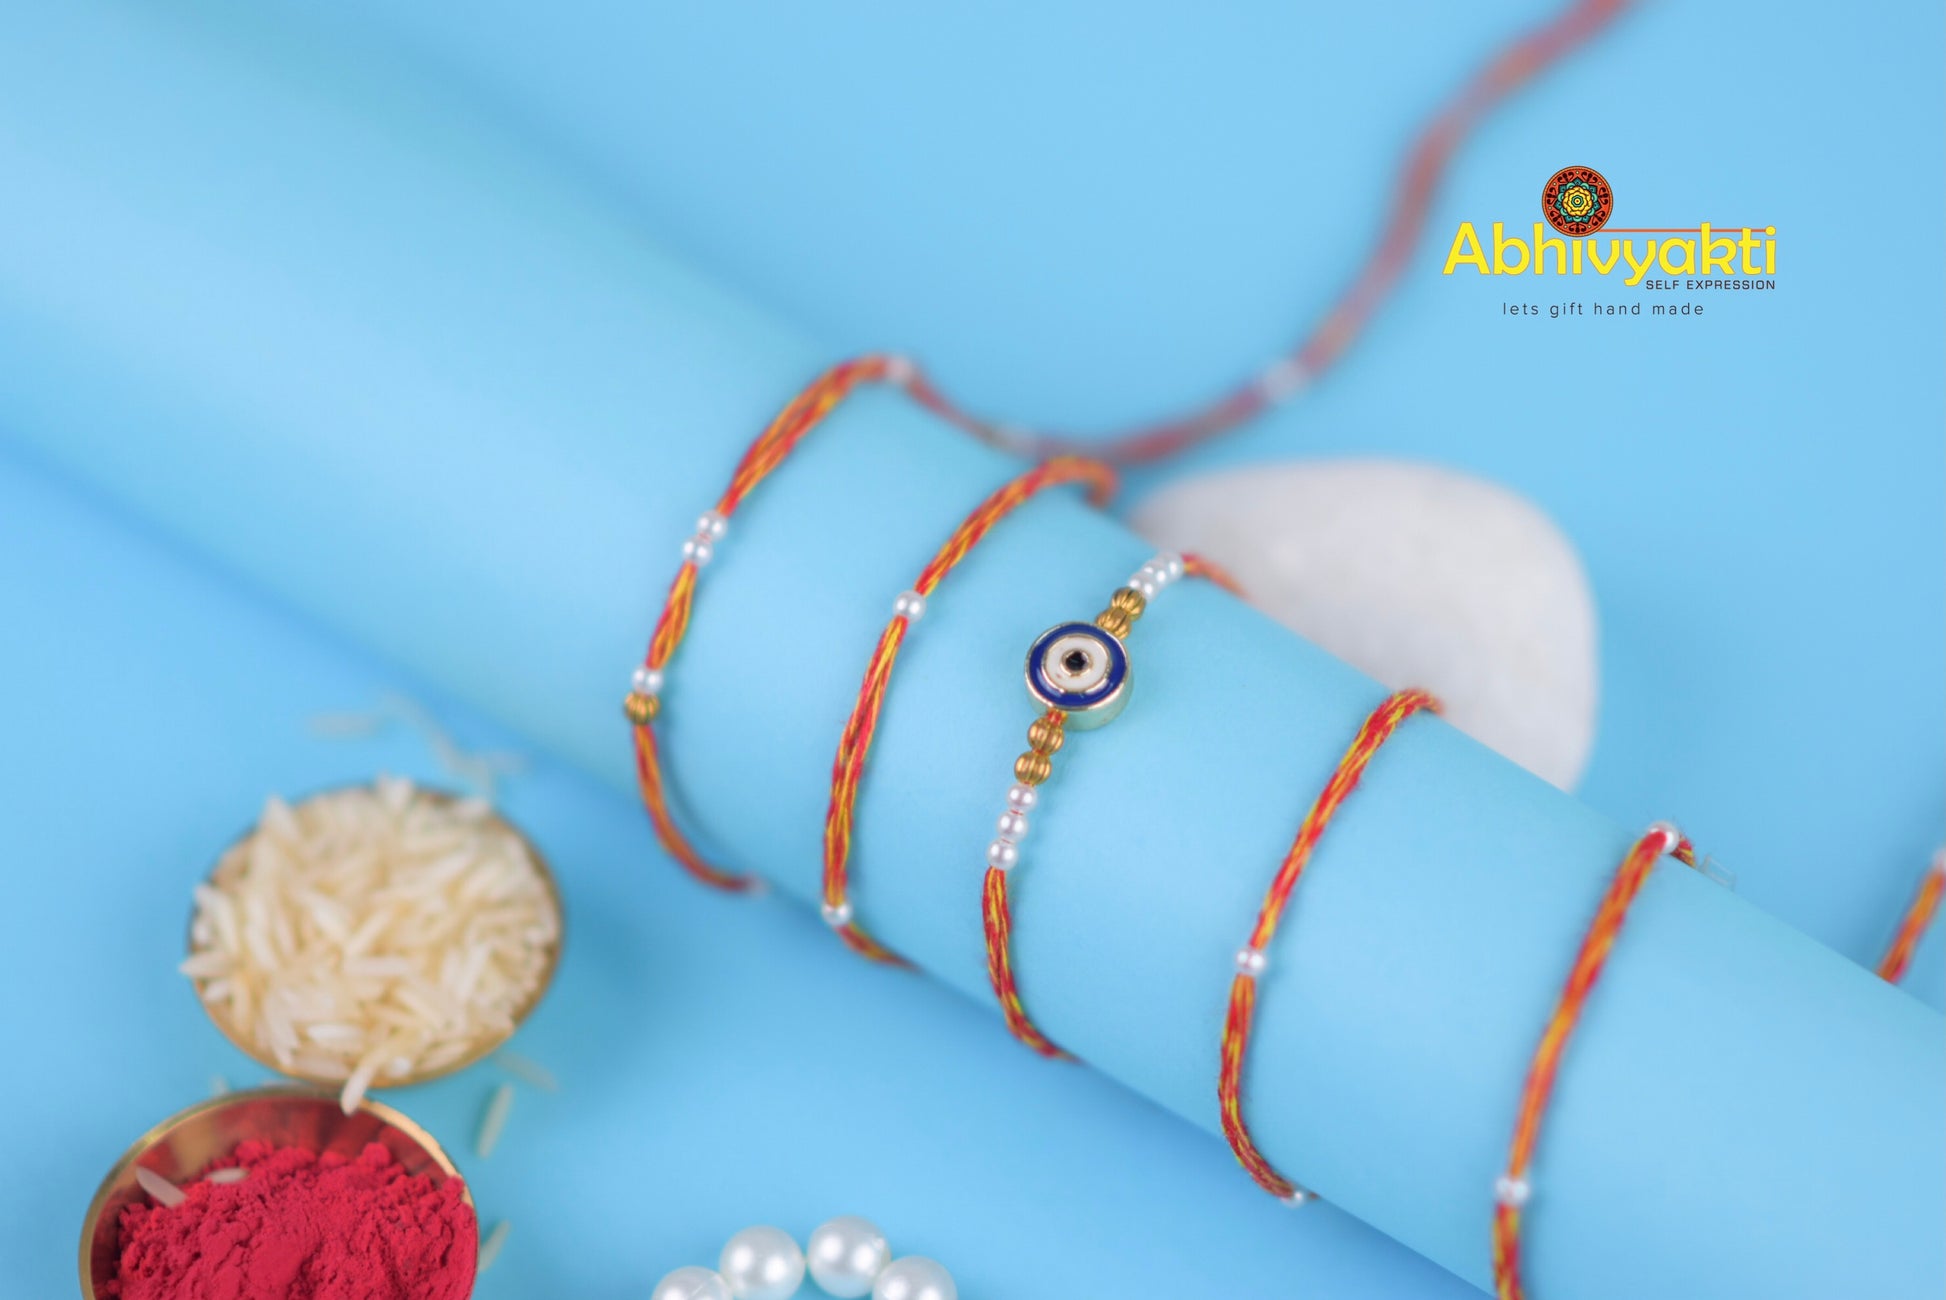 A bracelet adorned with a blue and white evil eye, made of thread with beads.